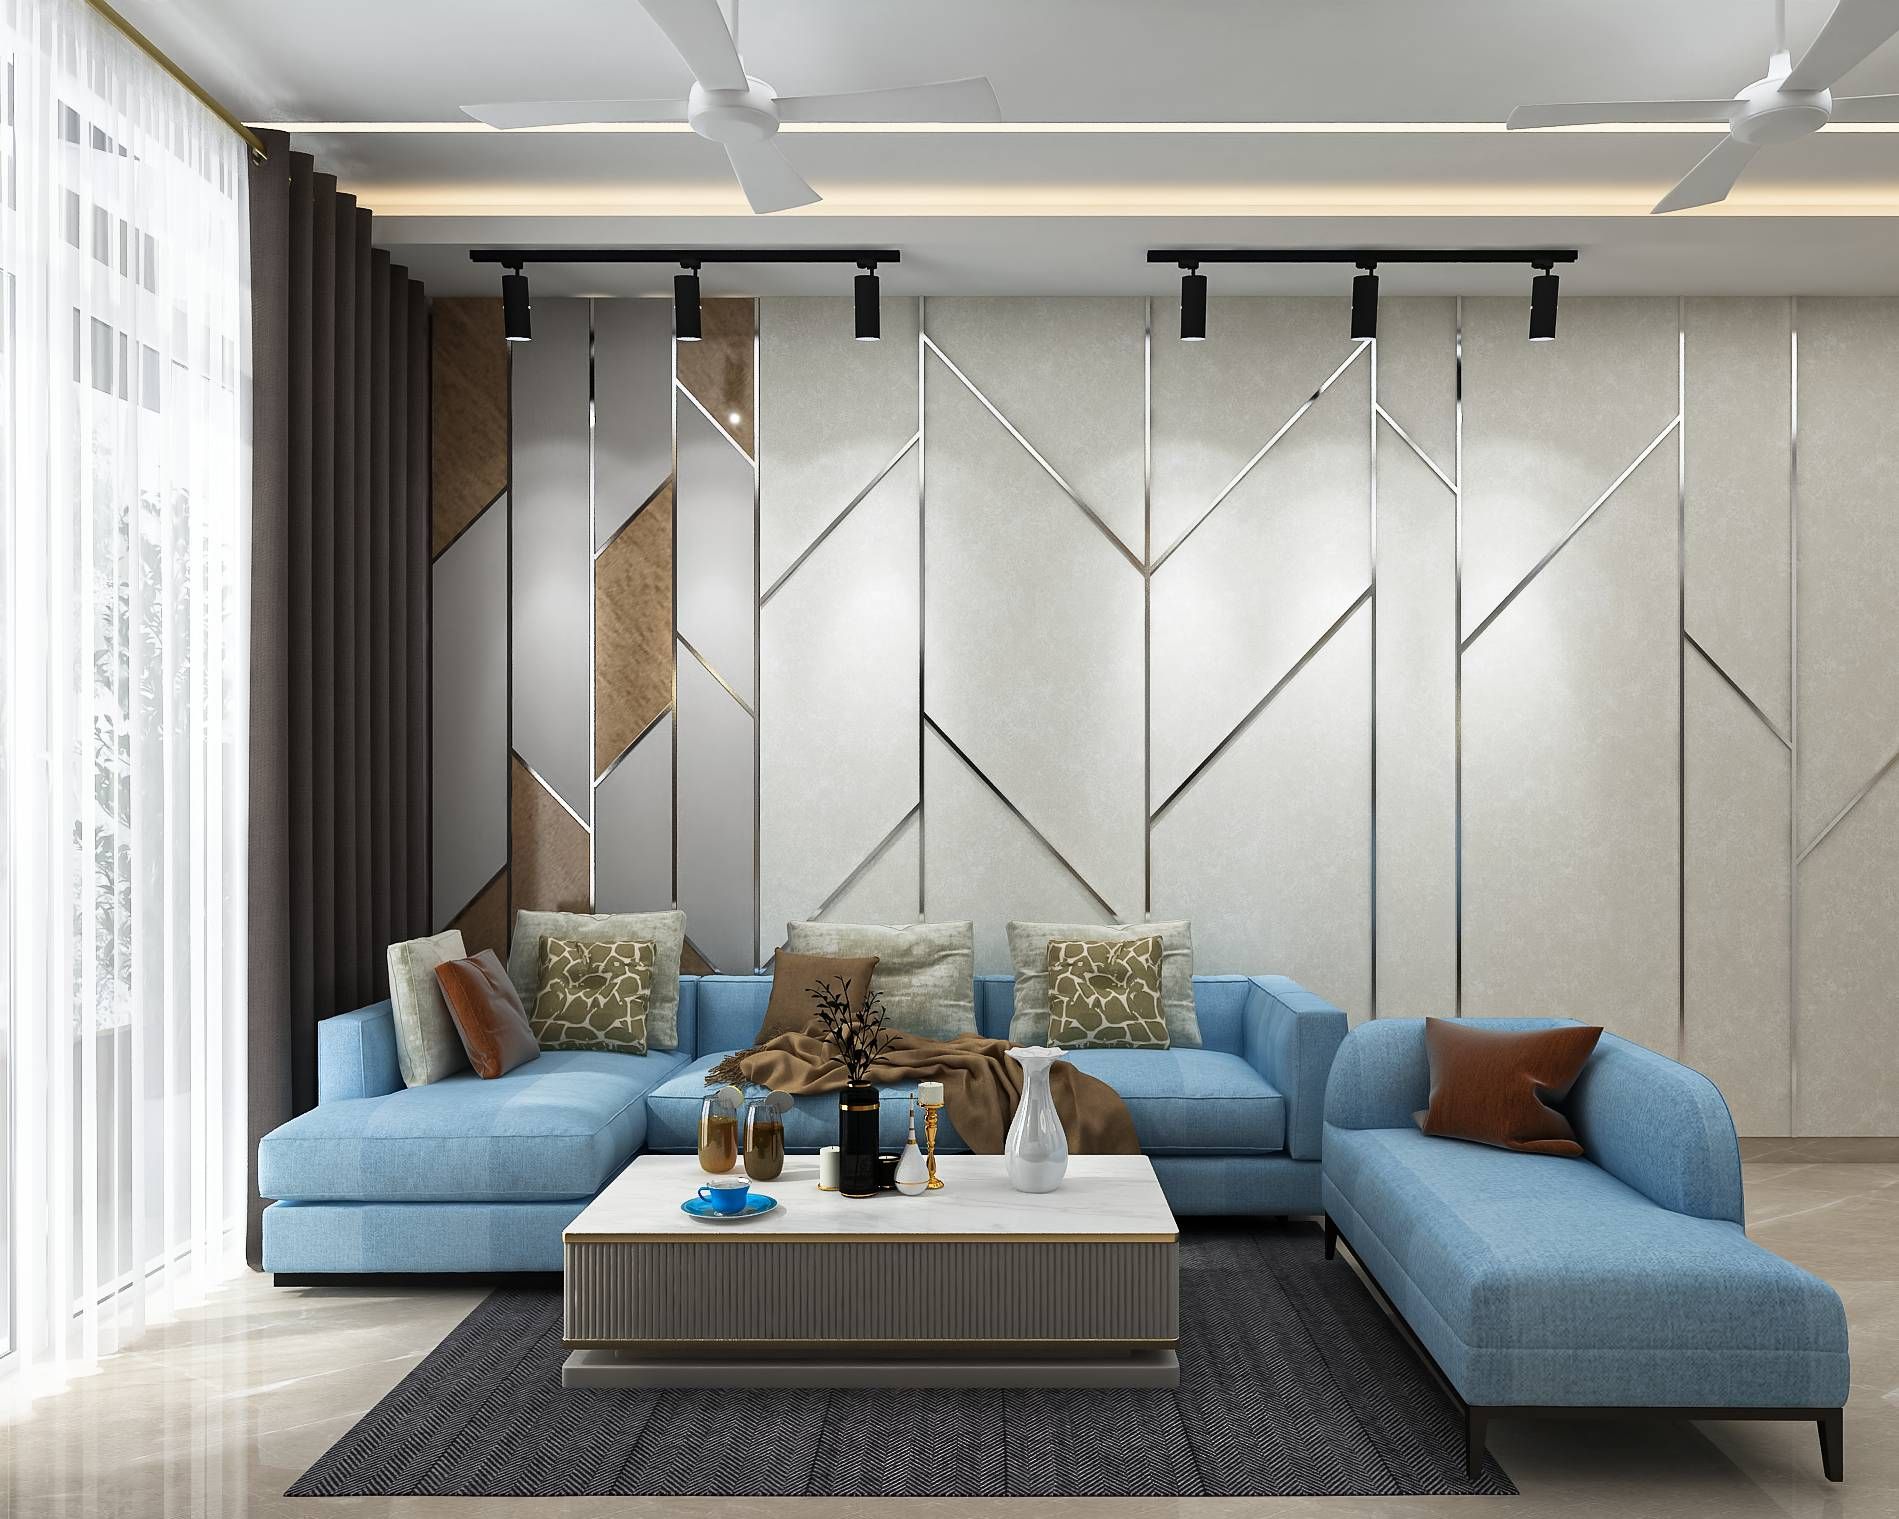 Modern Living Room Design With L-Shaped Sofa